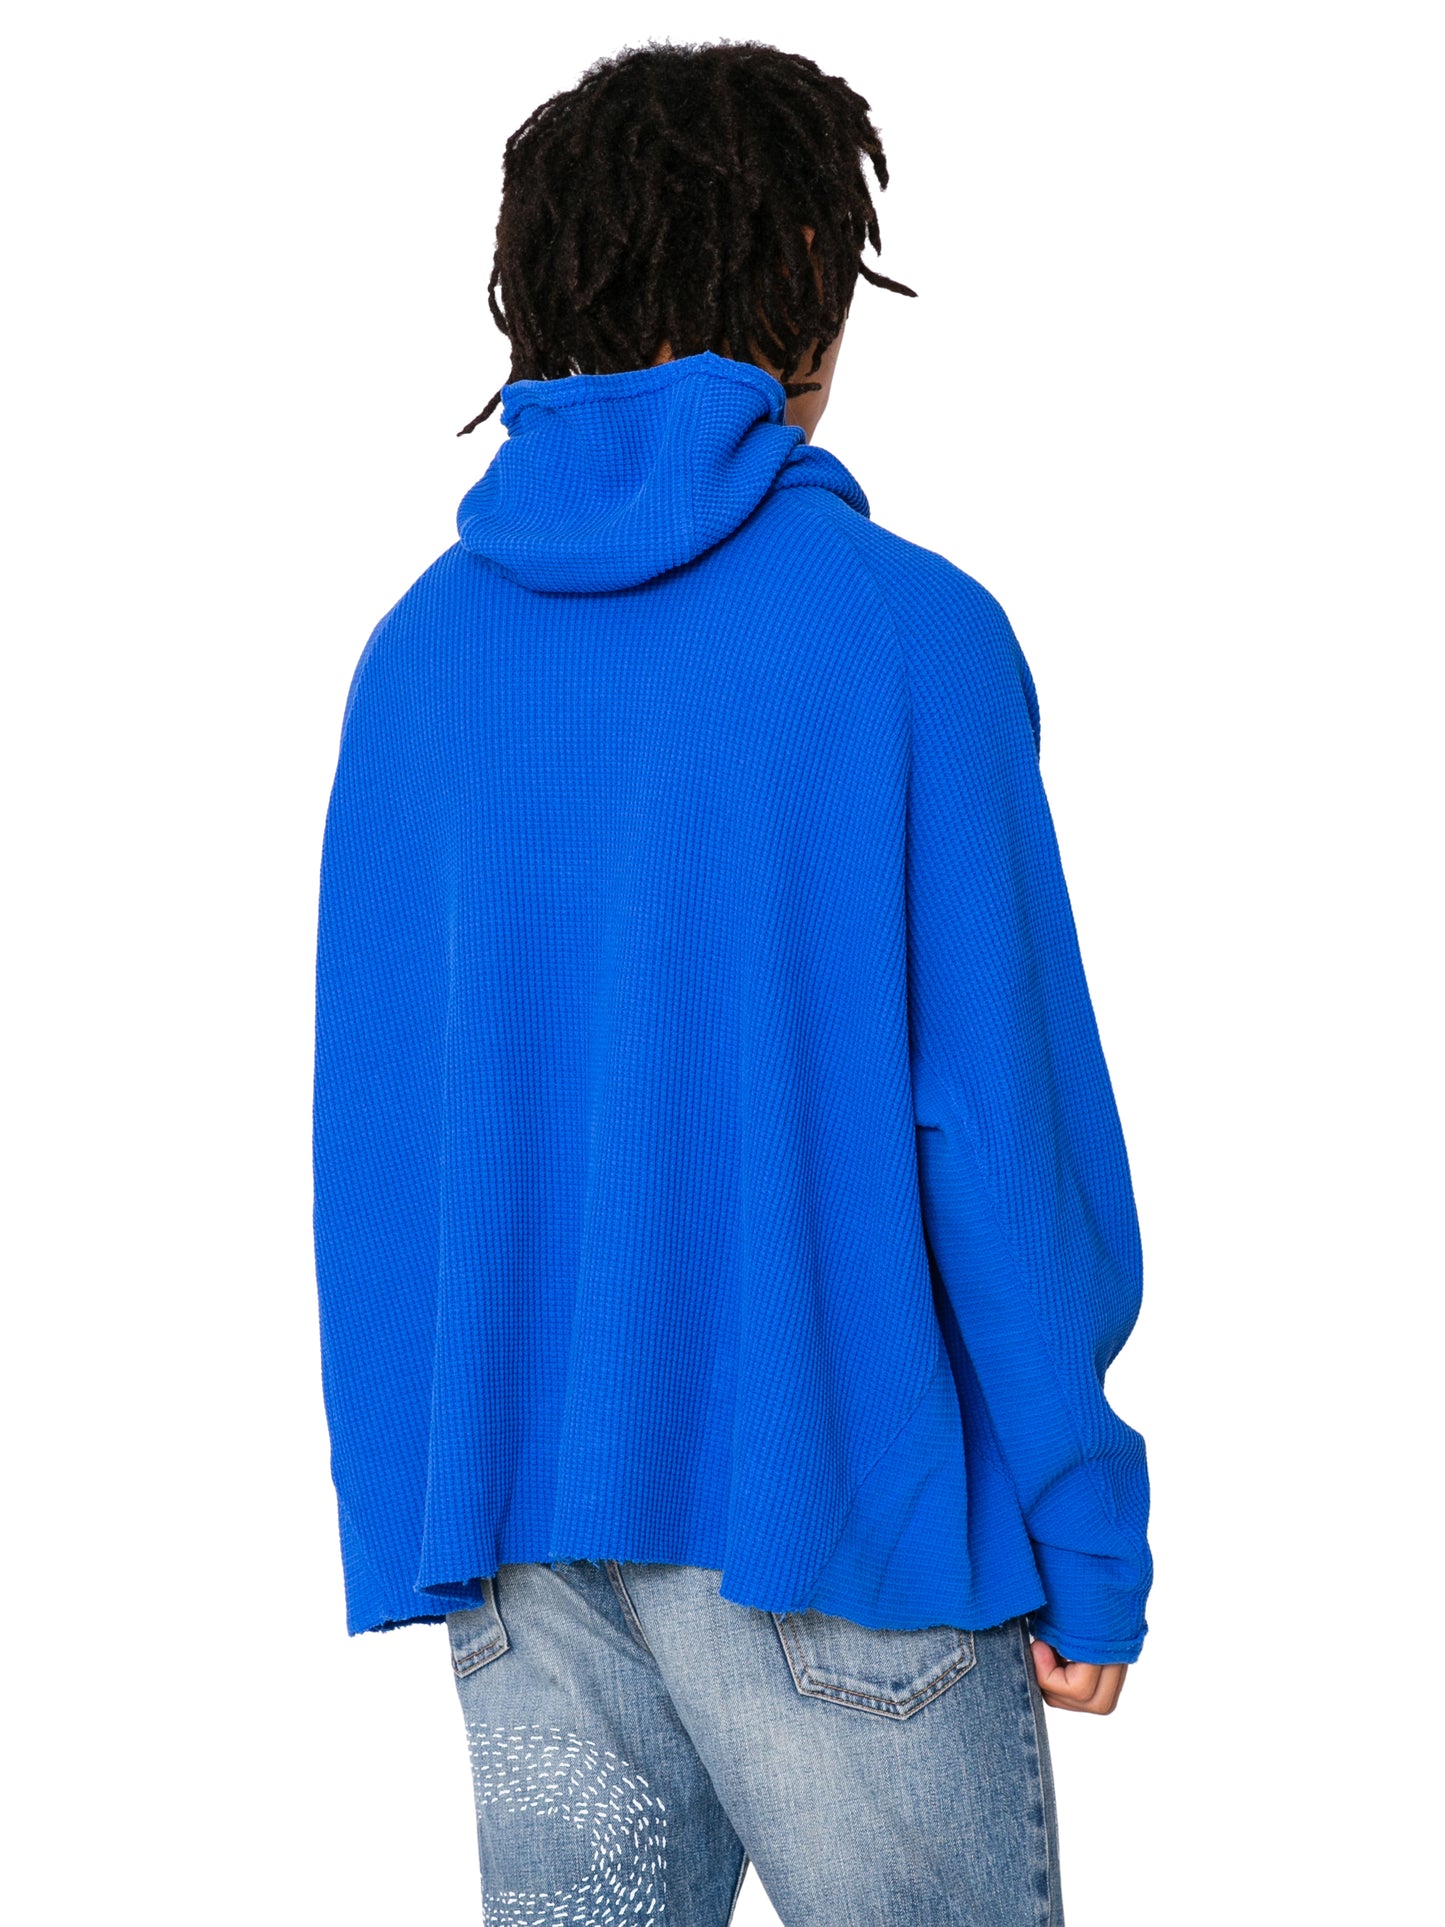 ORGANIZED H.ZIP  PULLOVER TOP
/ C.THERMAL